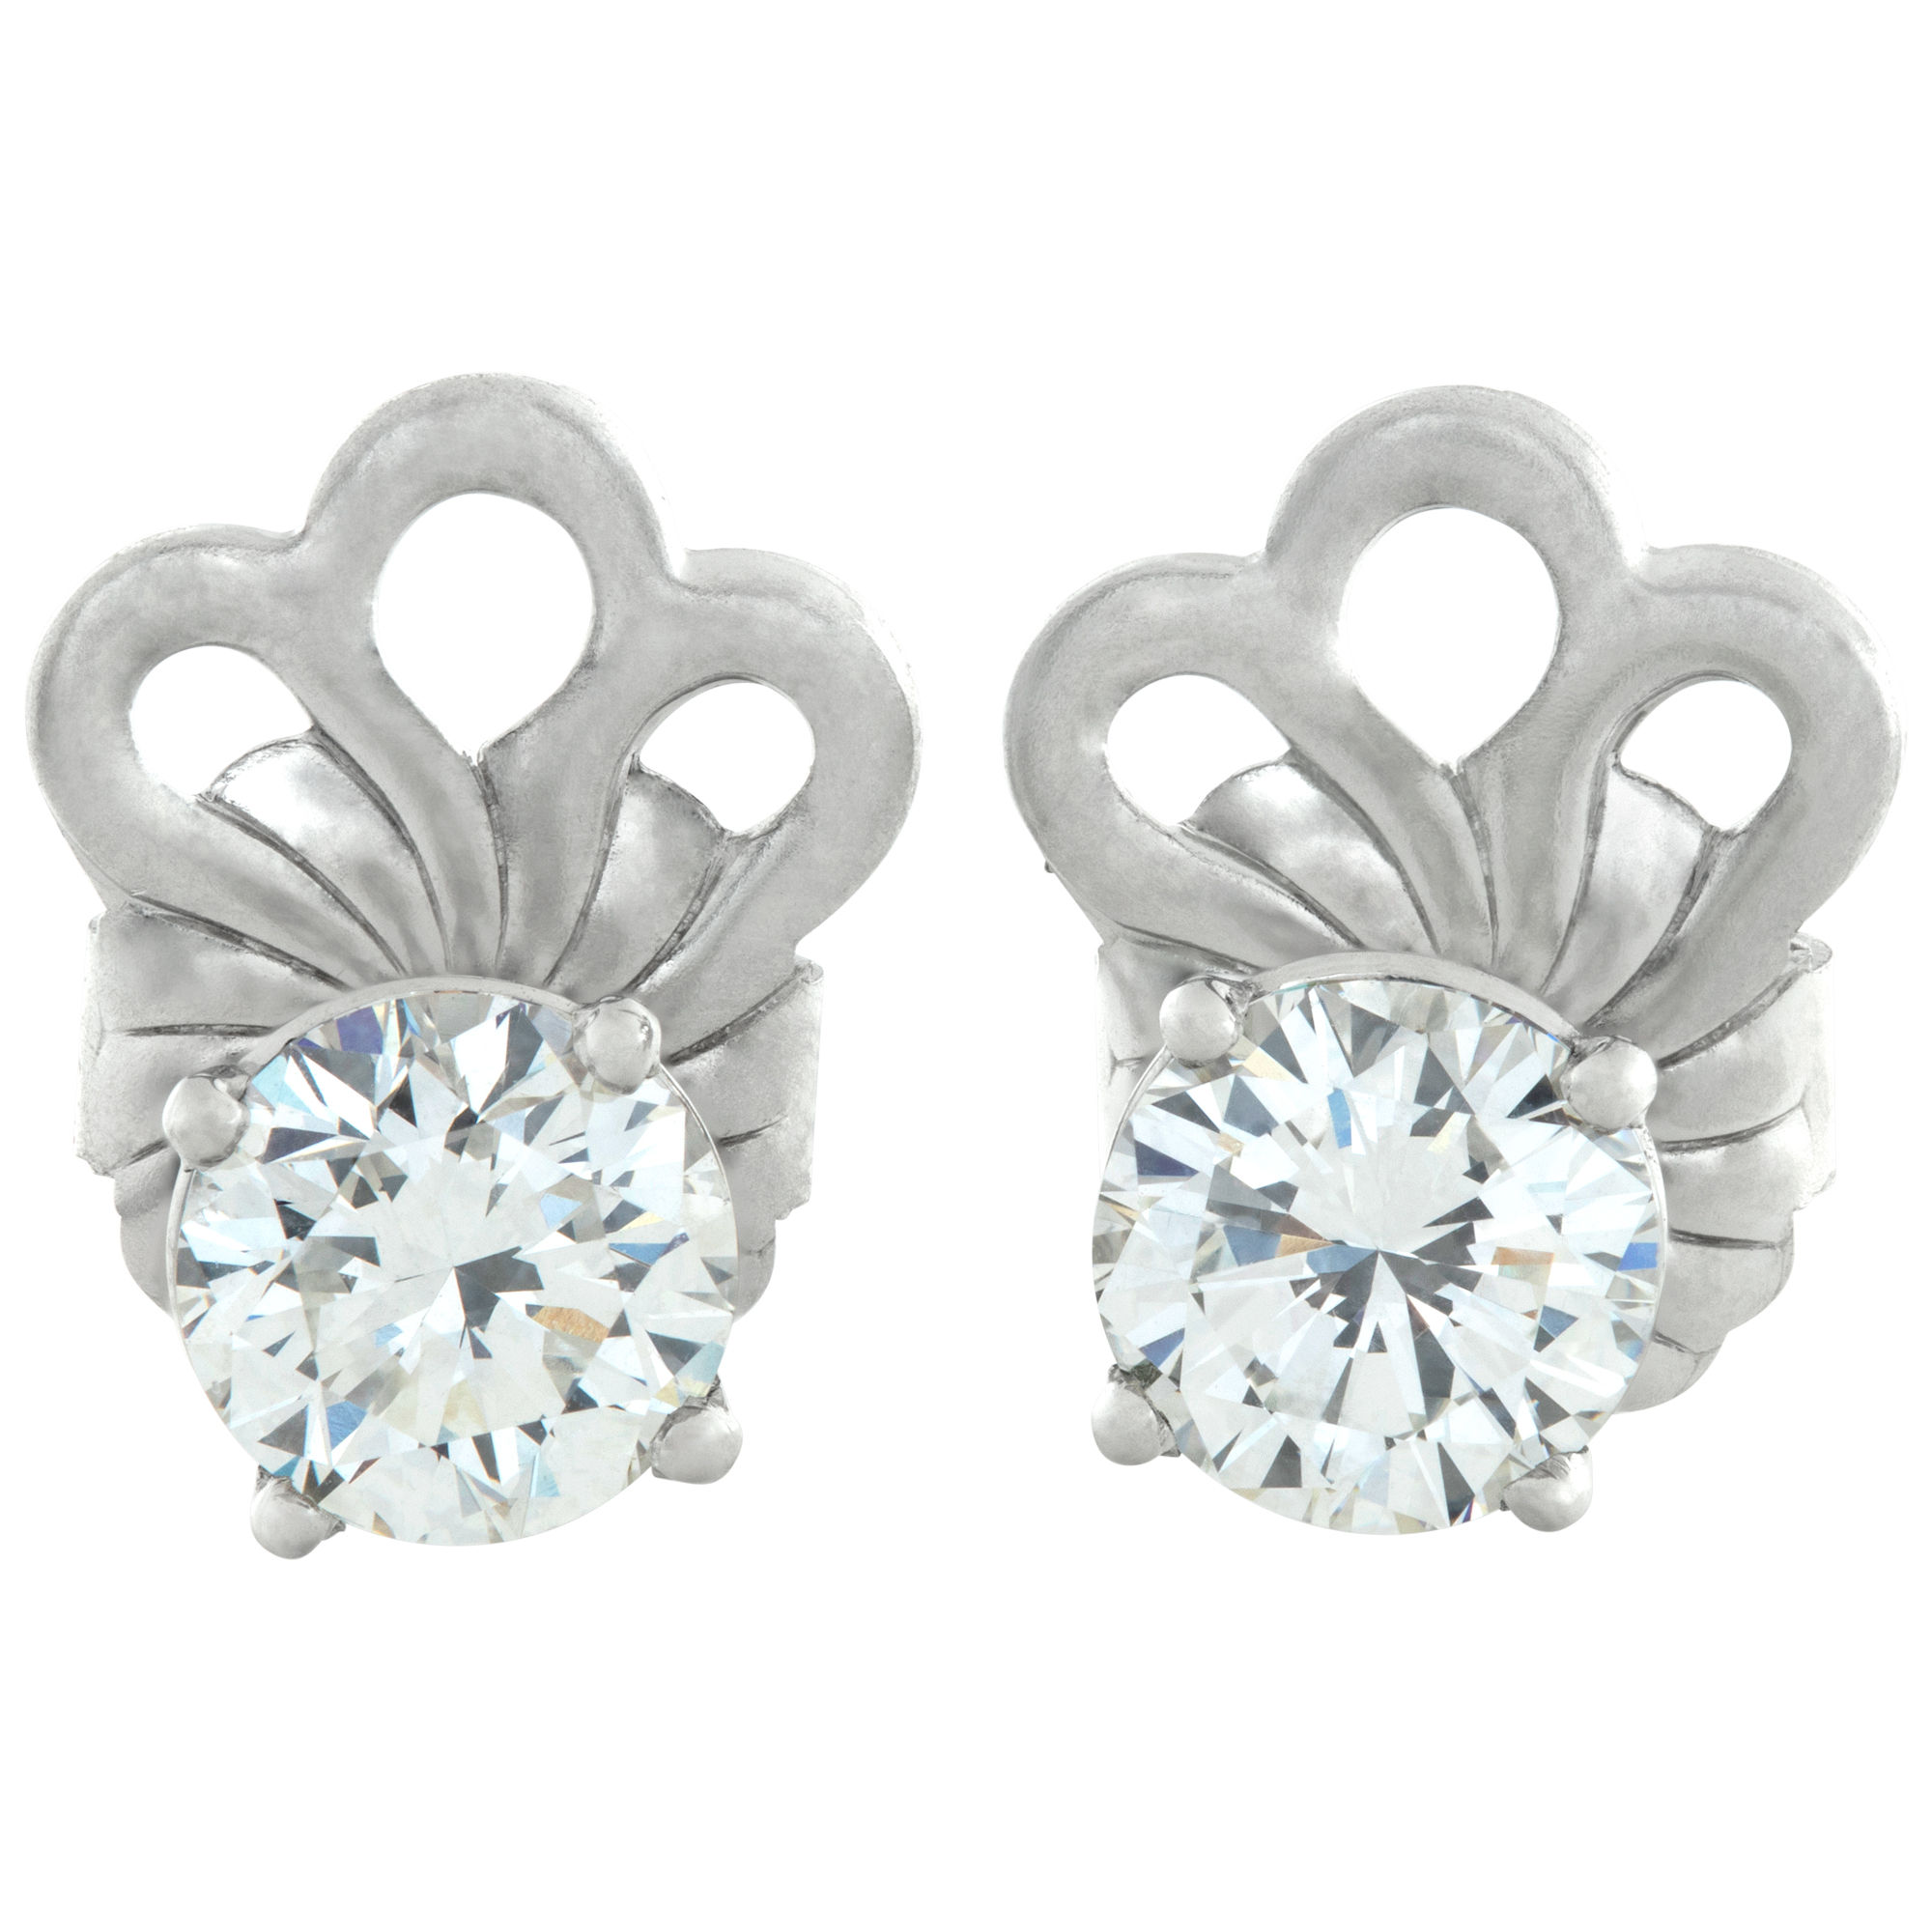 GIA certified round brilliant cut diamond studs 1 carat (G color, SI1 clarity) and 0.98 carat (G color, VS1 clarity)